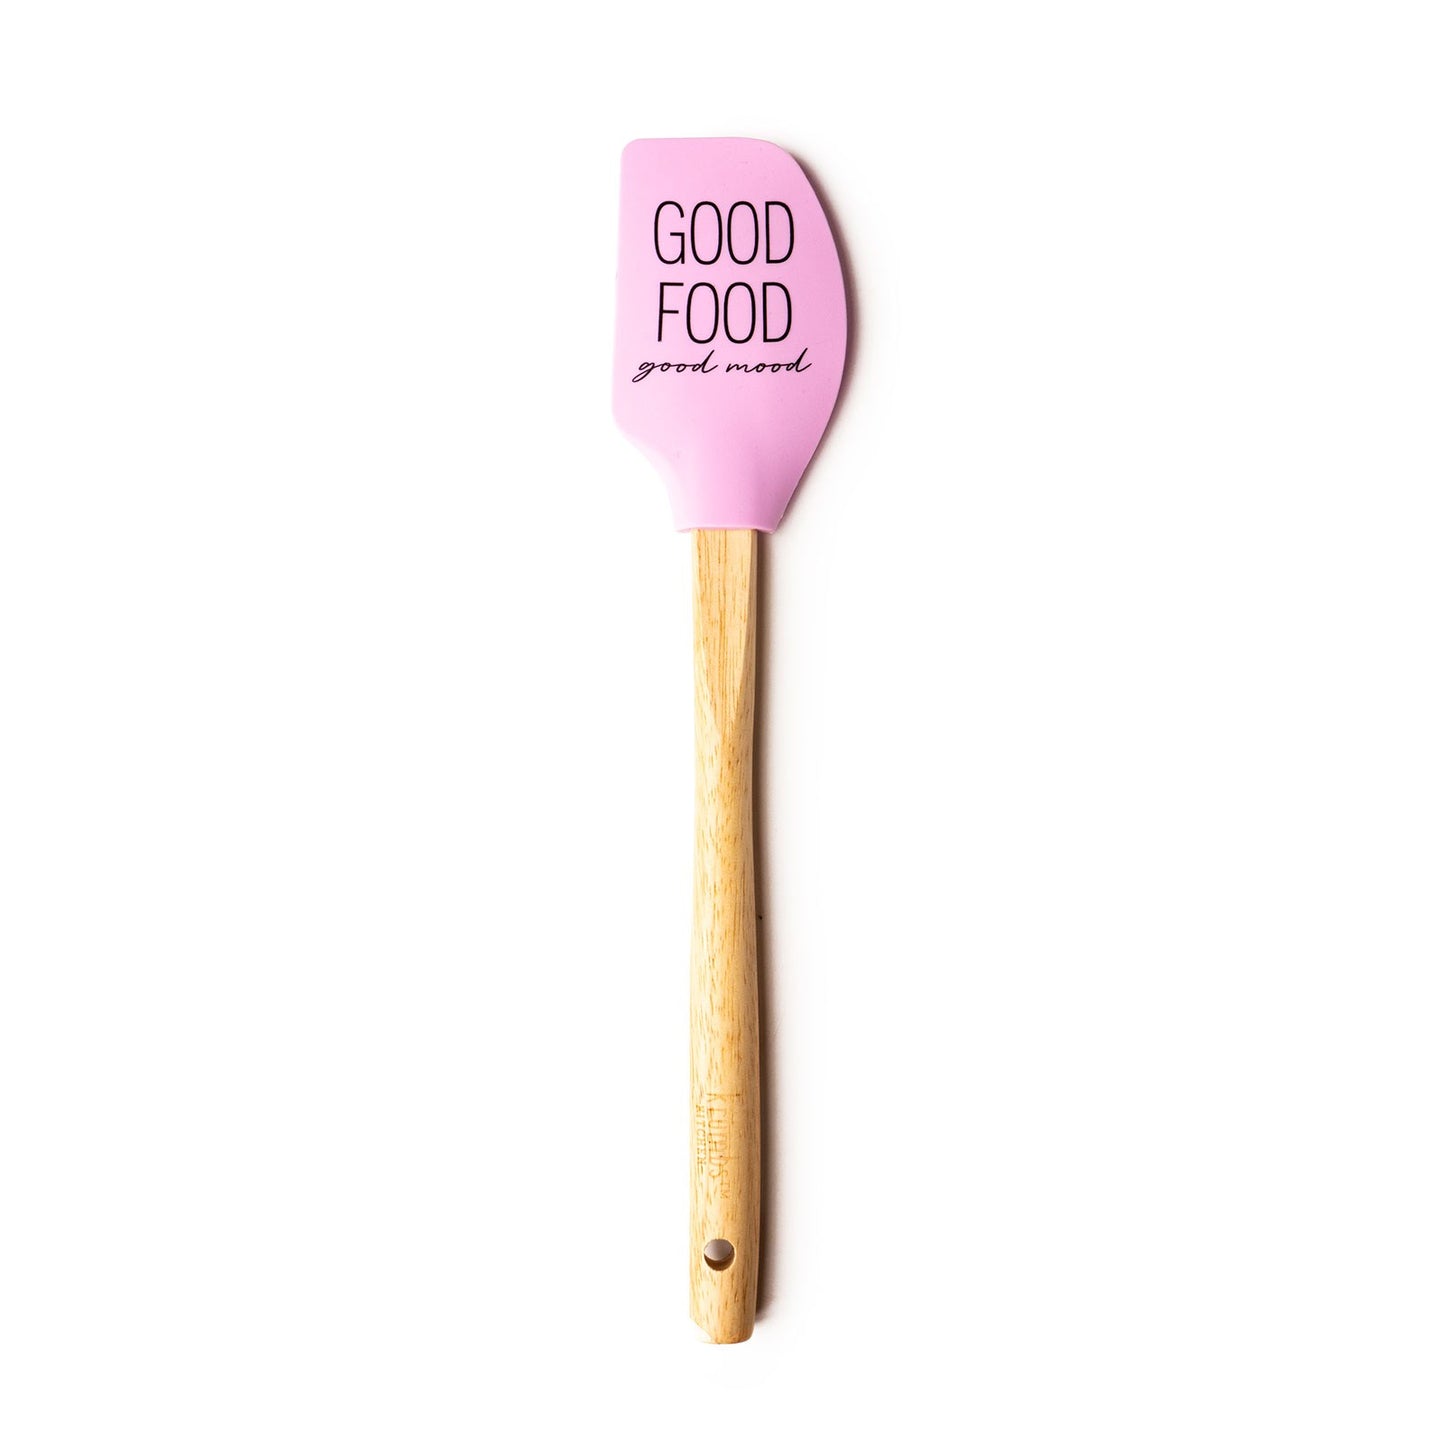 pink spatula with "good food good mood" printed on it and a wooden handle.